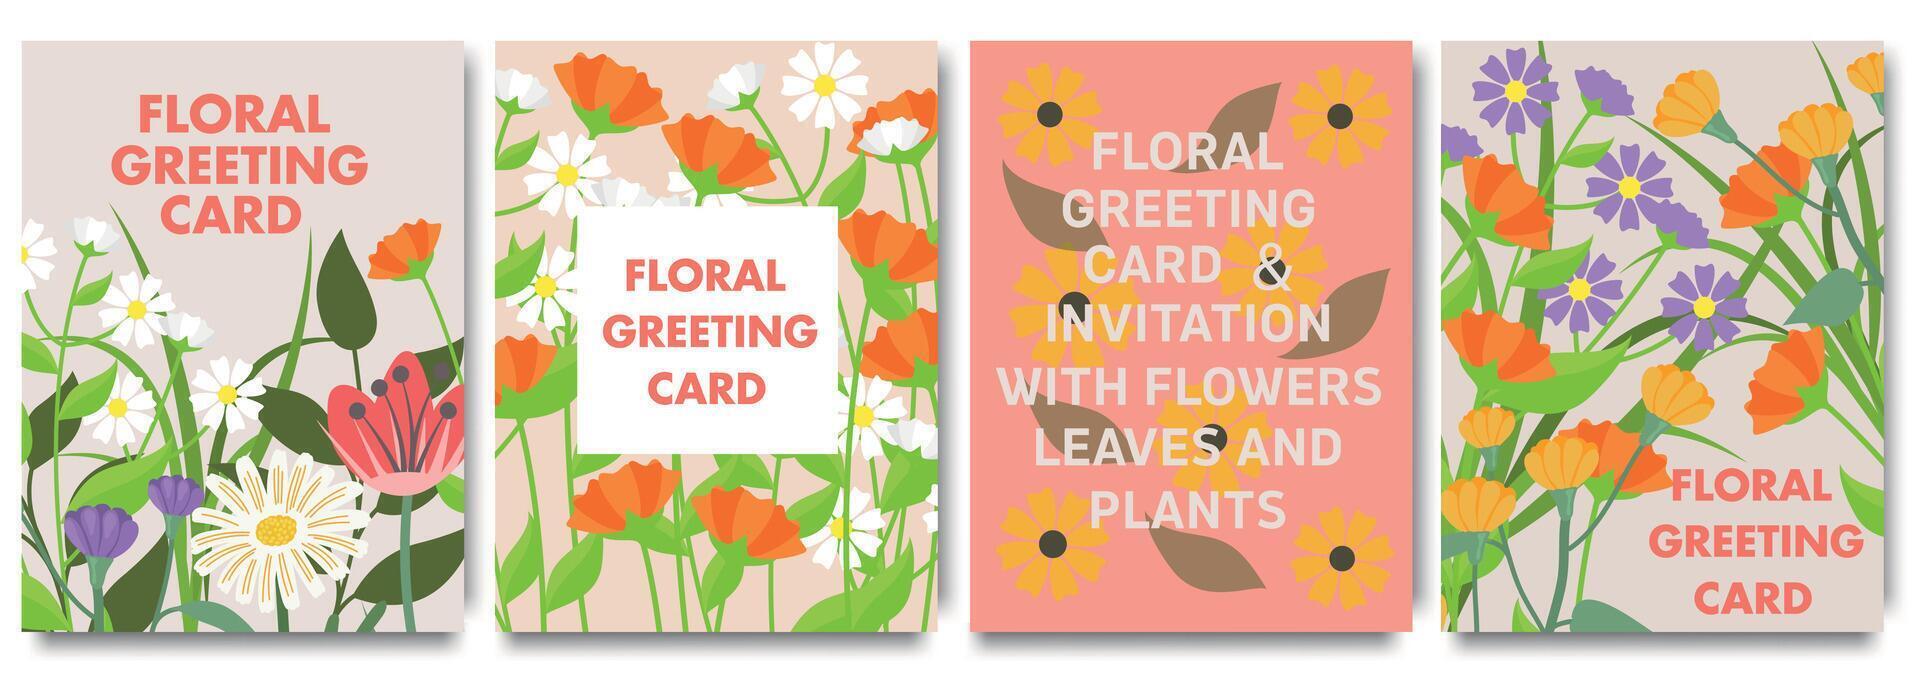 Floral greeting card. Vector illustrations of spring cute watercolor flowers, plants, leaves for invitation, pattern or background. Cover design for abstract greeting card, wedding invitation